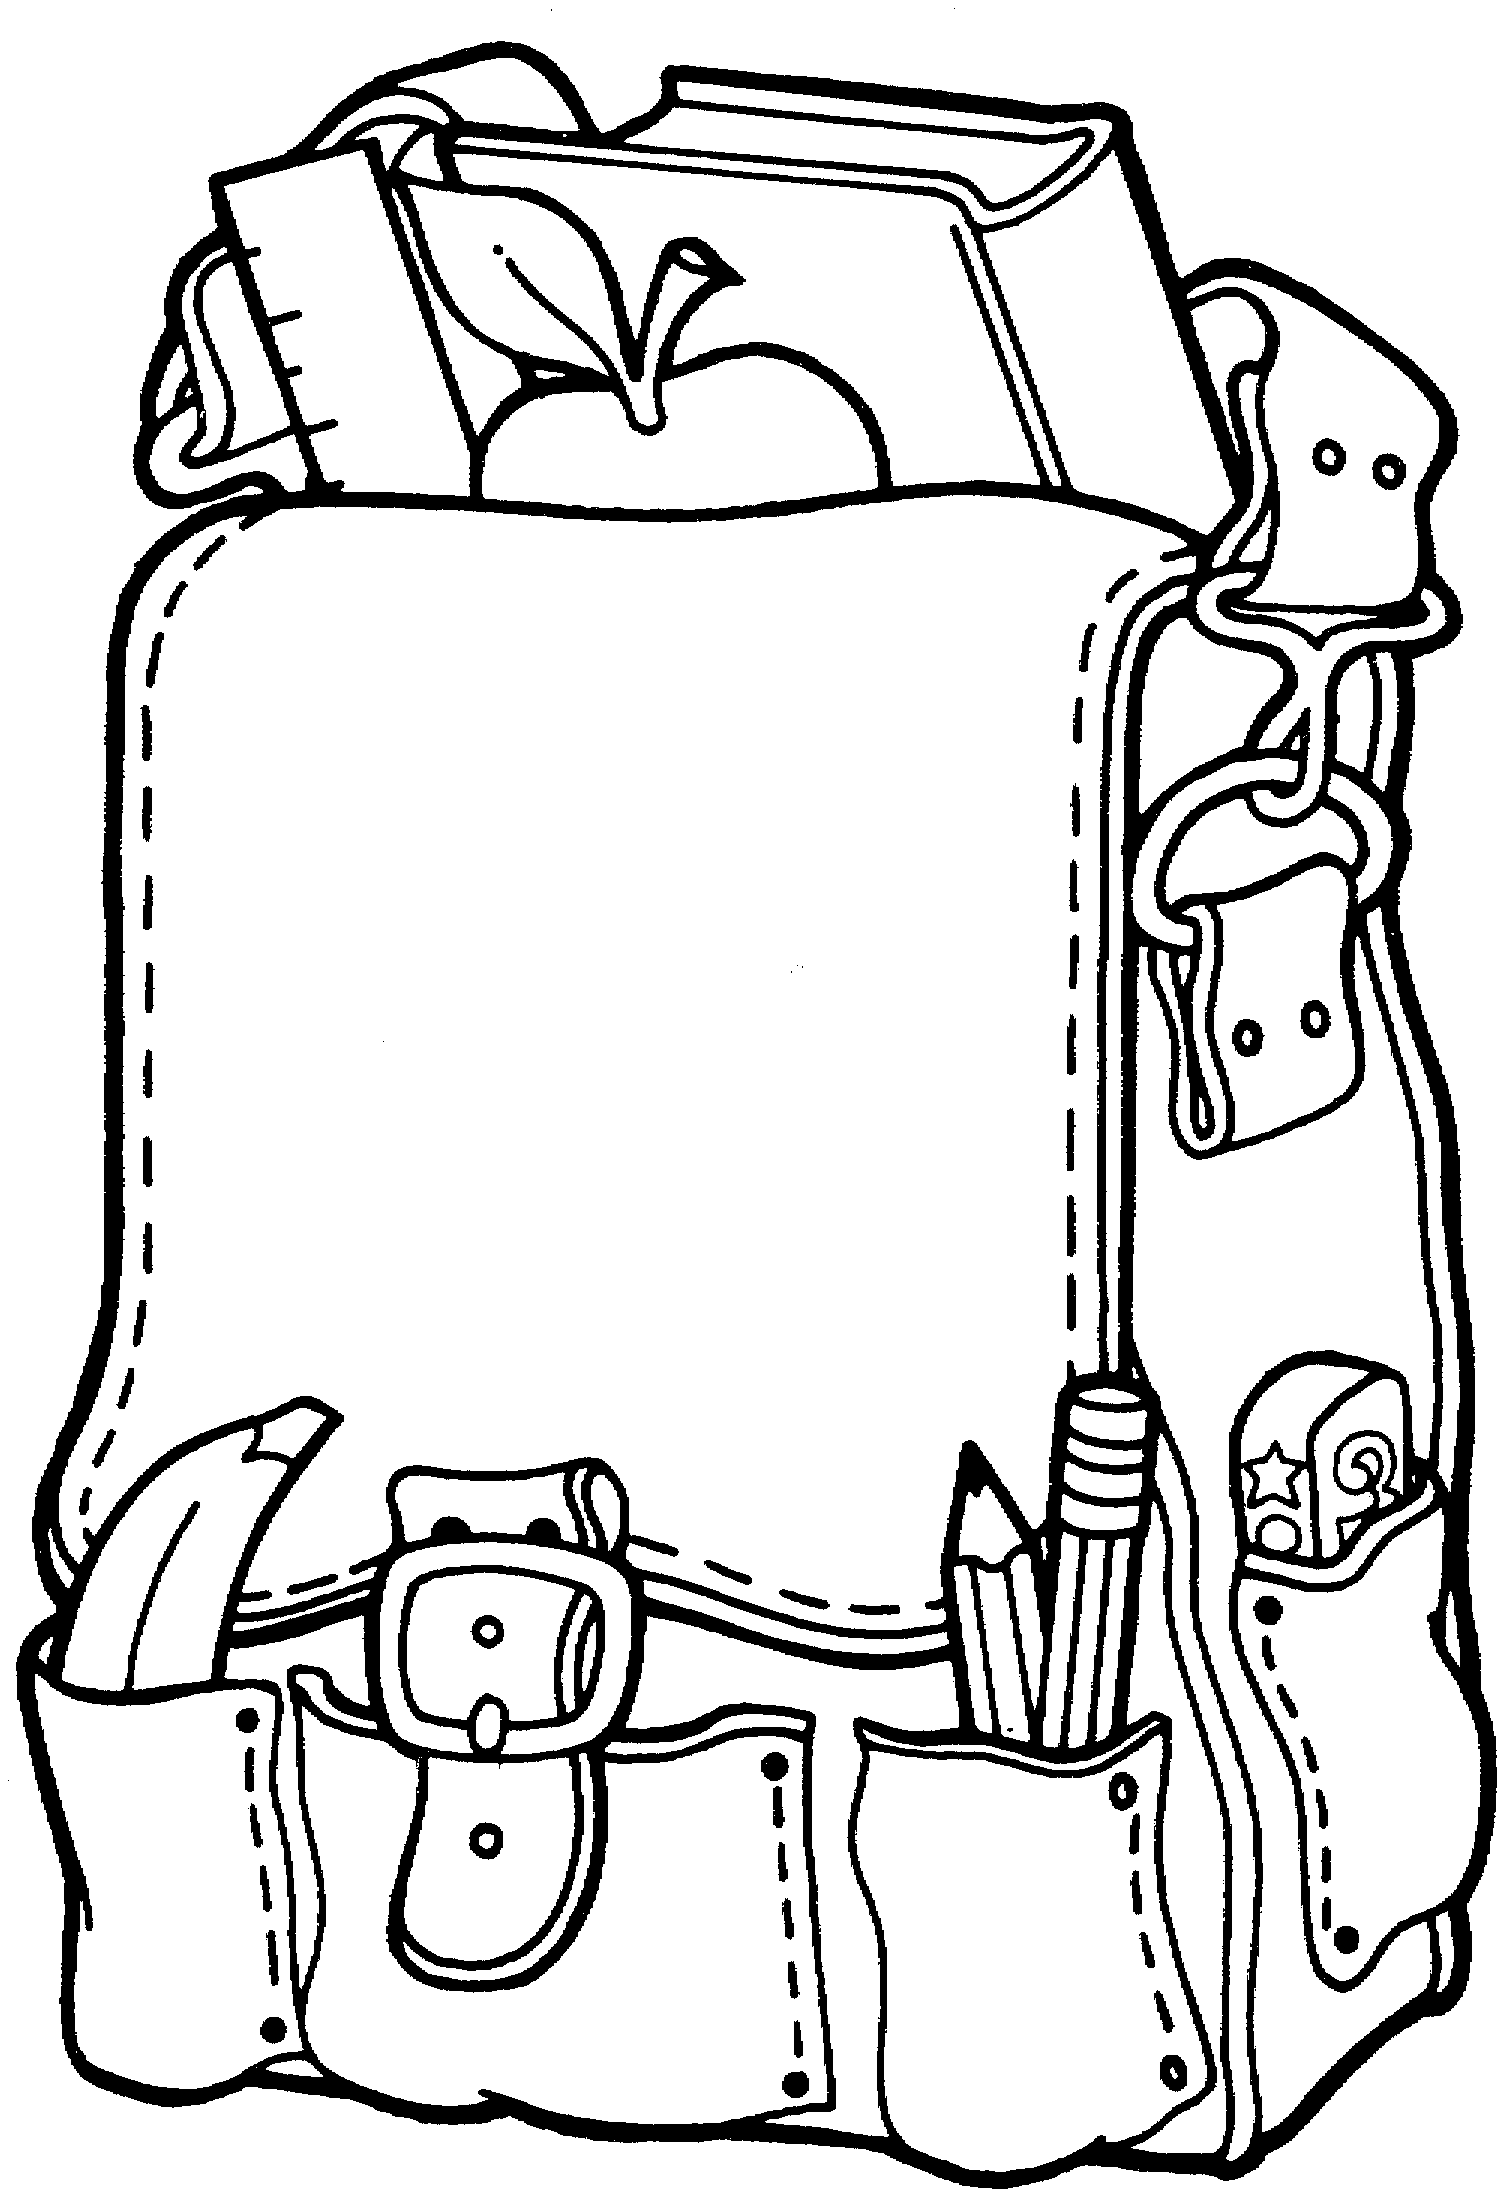 Backpack Preschool Coloring Pages